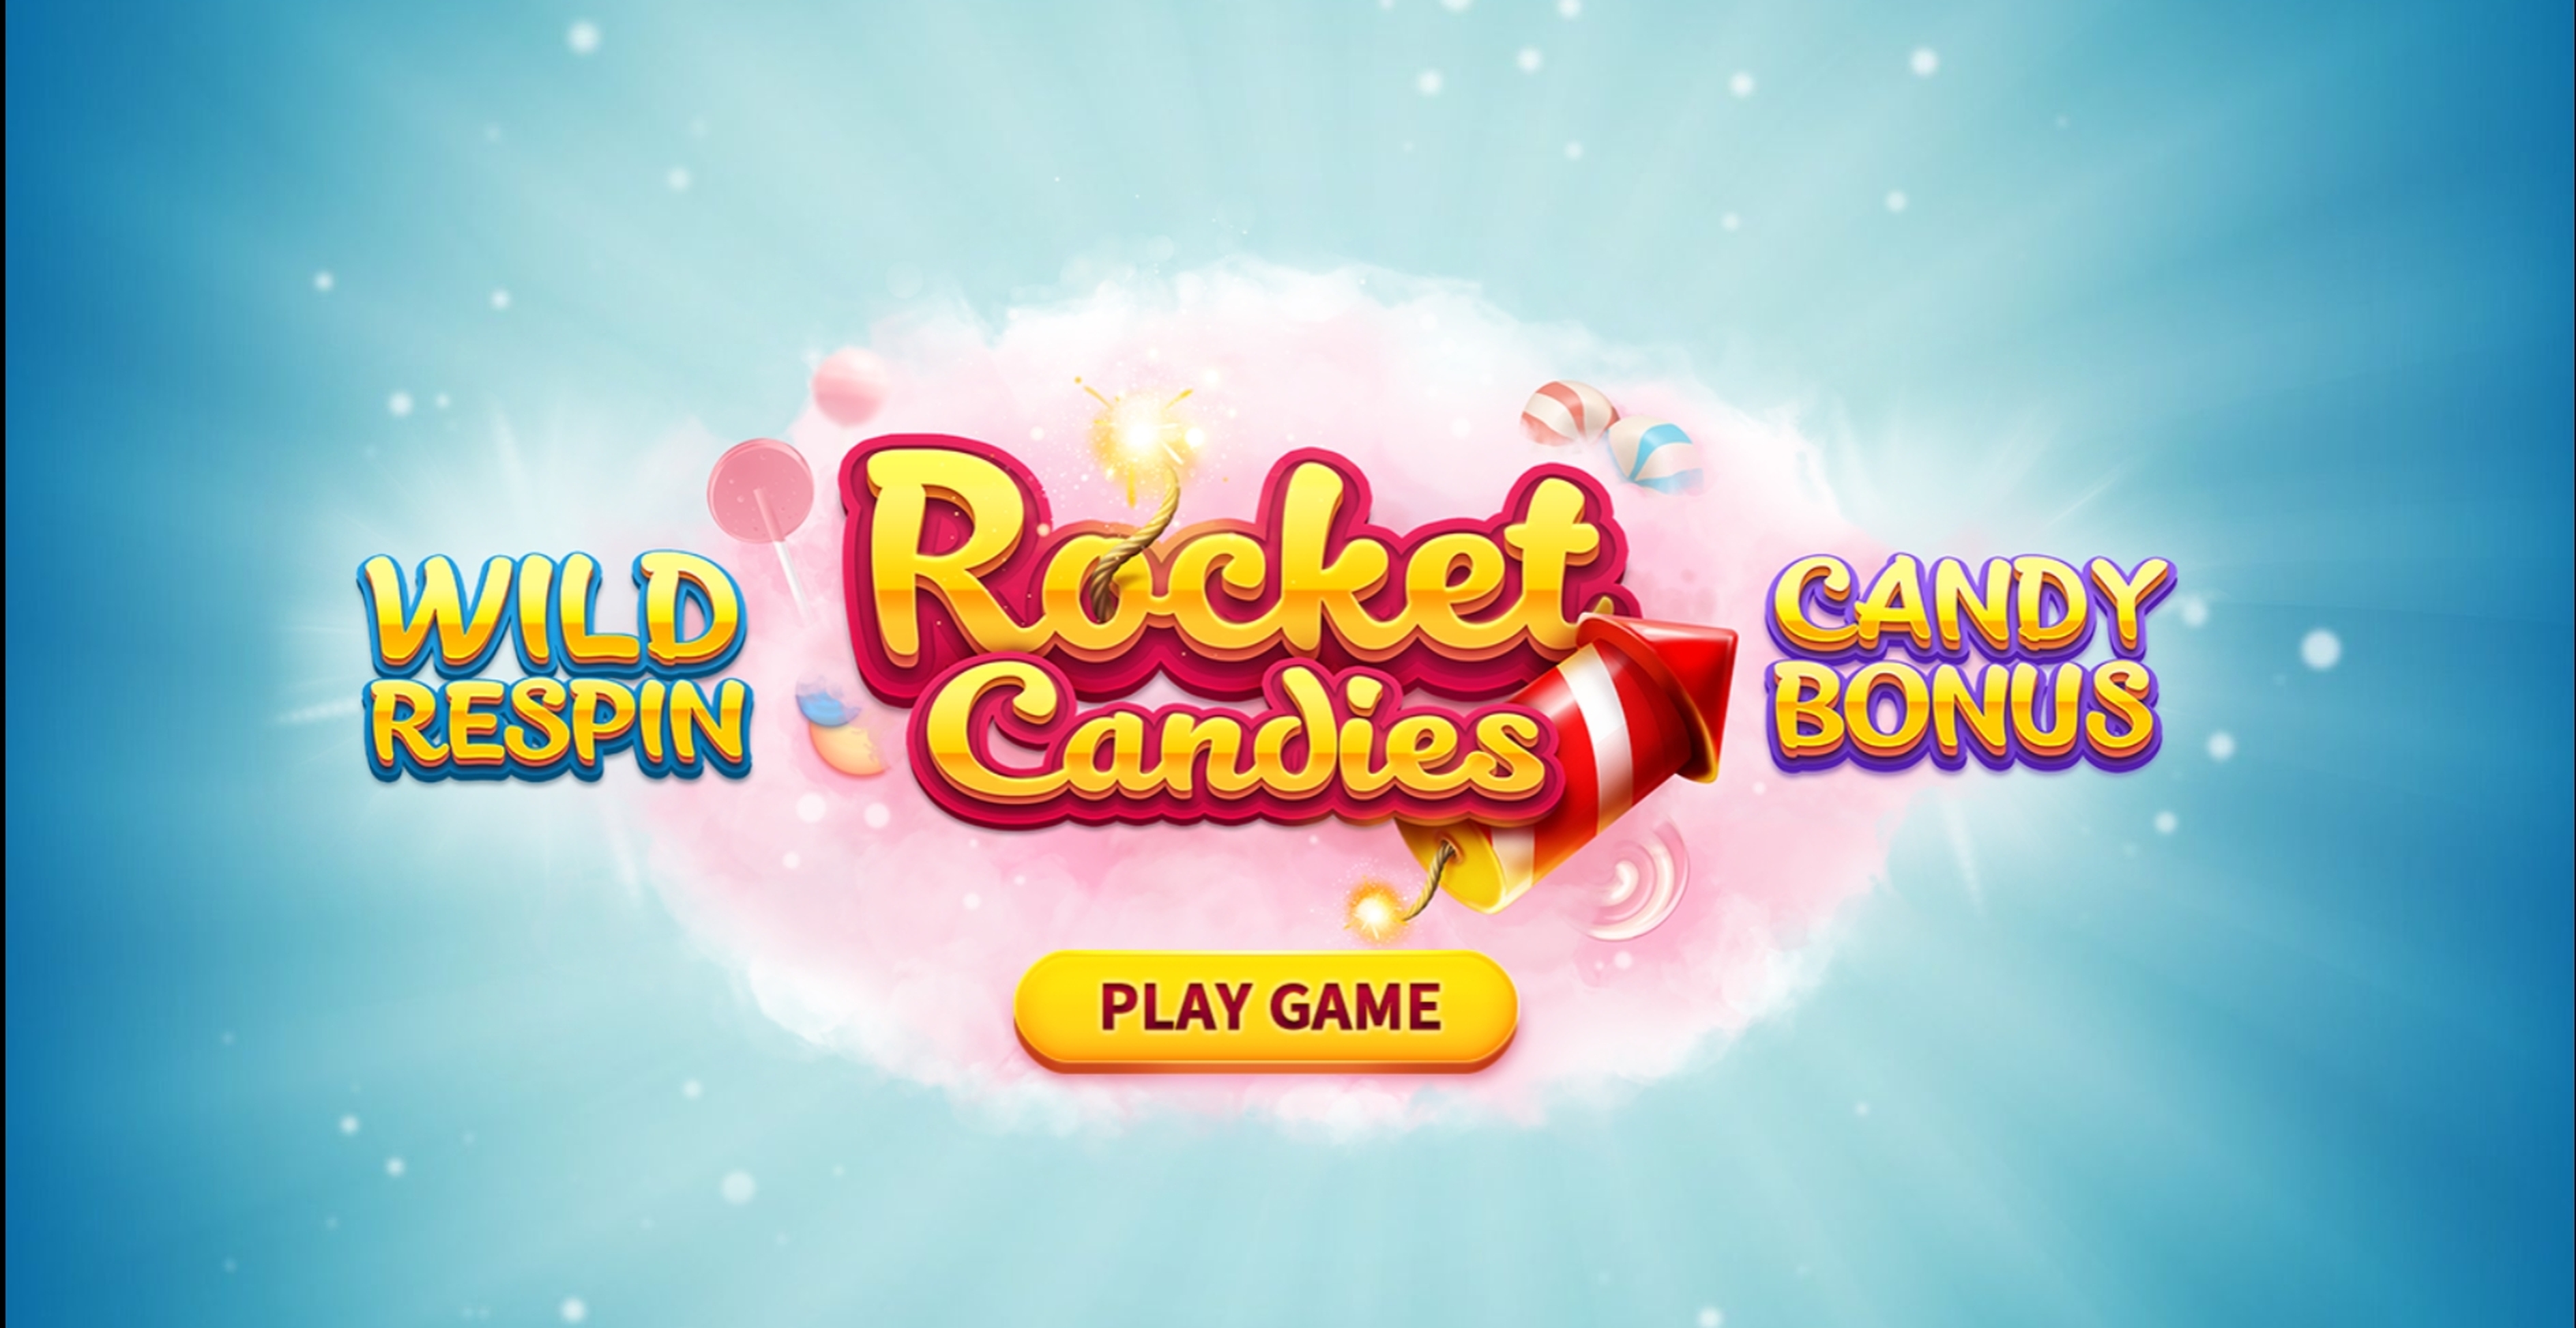 Play Rocket Candies Free Casino Slot Game by Skywind